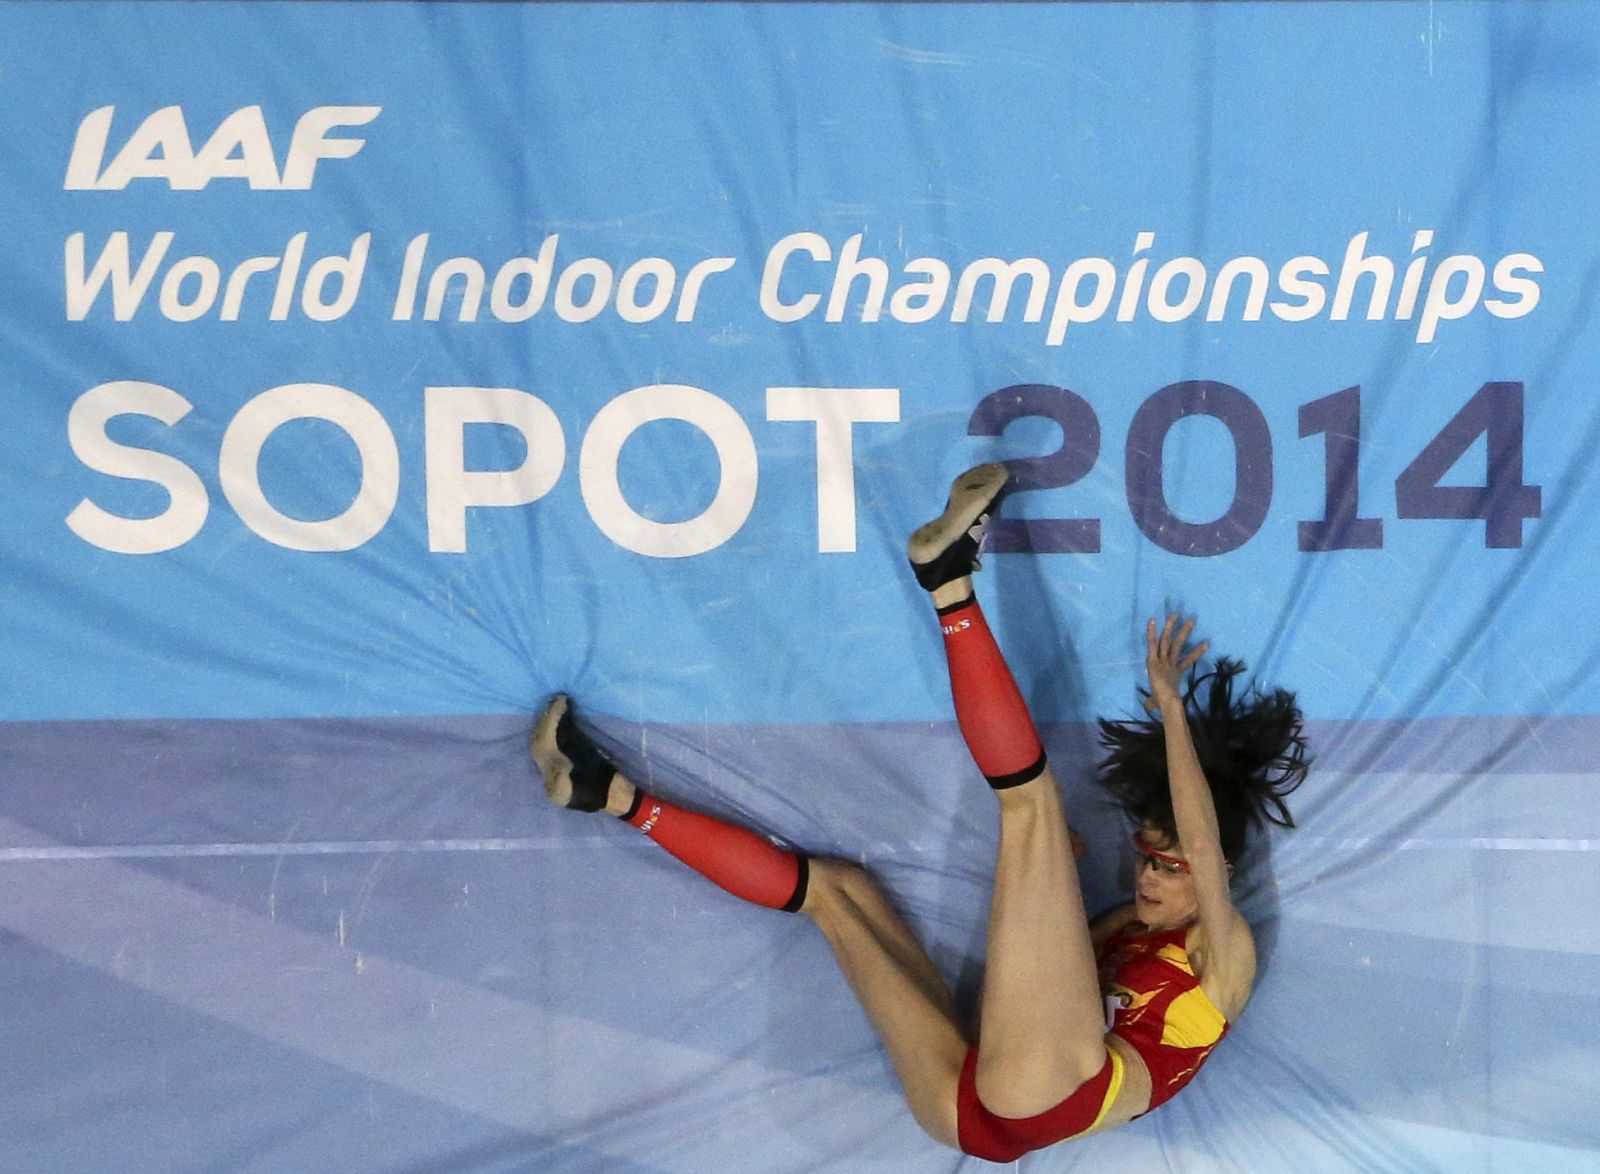 Spain's Beitia competes in the women's high jump final at world indoor athletics championships in Sopot